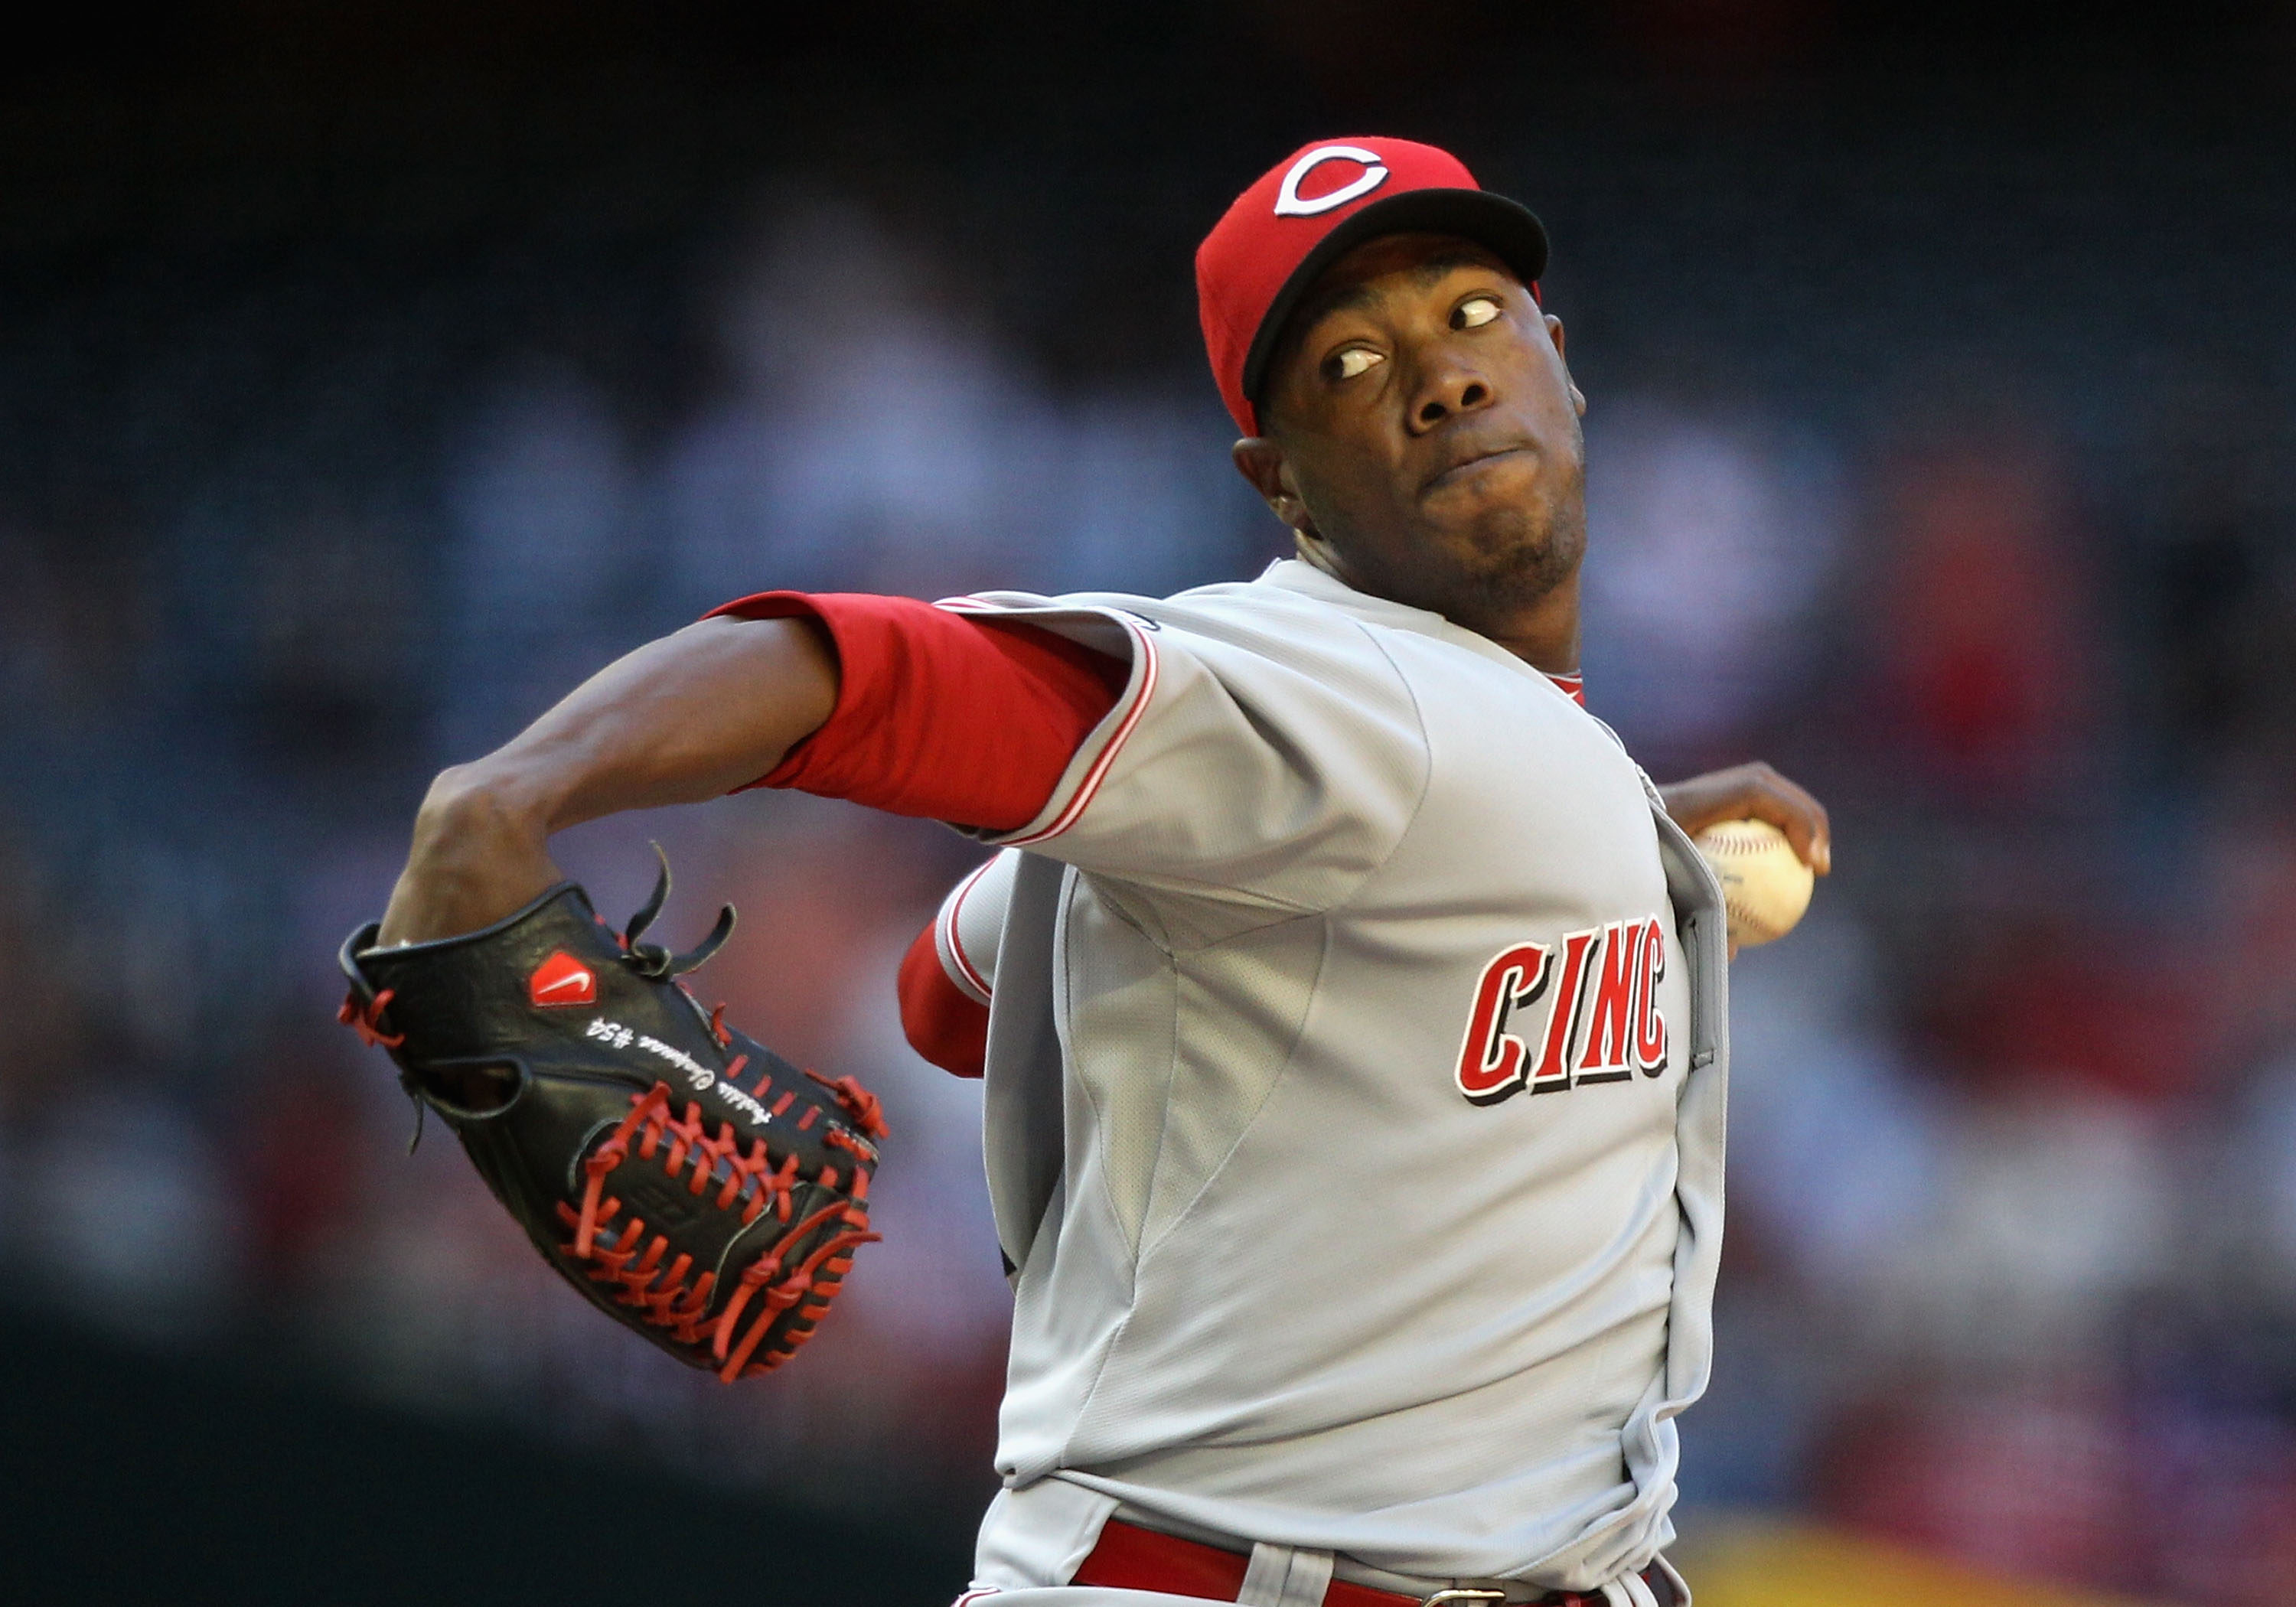 June 15, 16, 19] Aroldis Chapman, the pitch info for all the